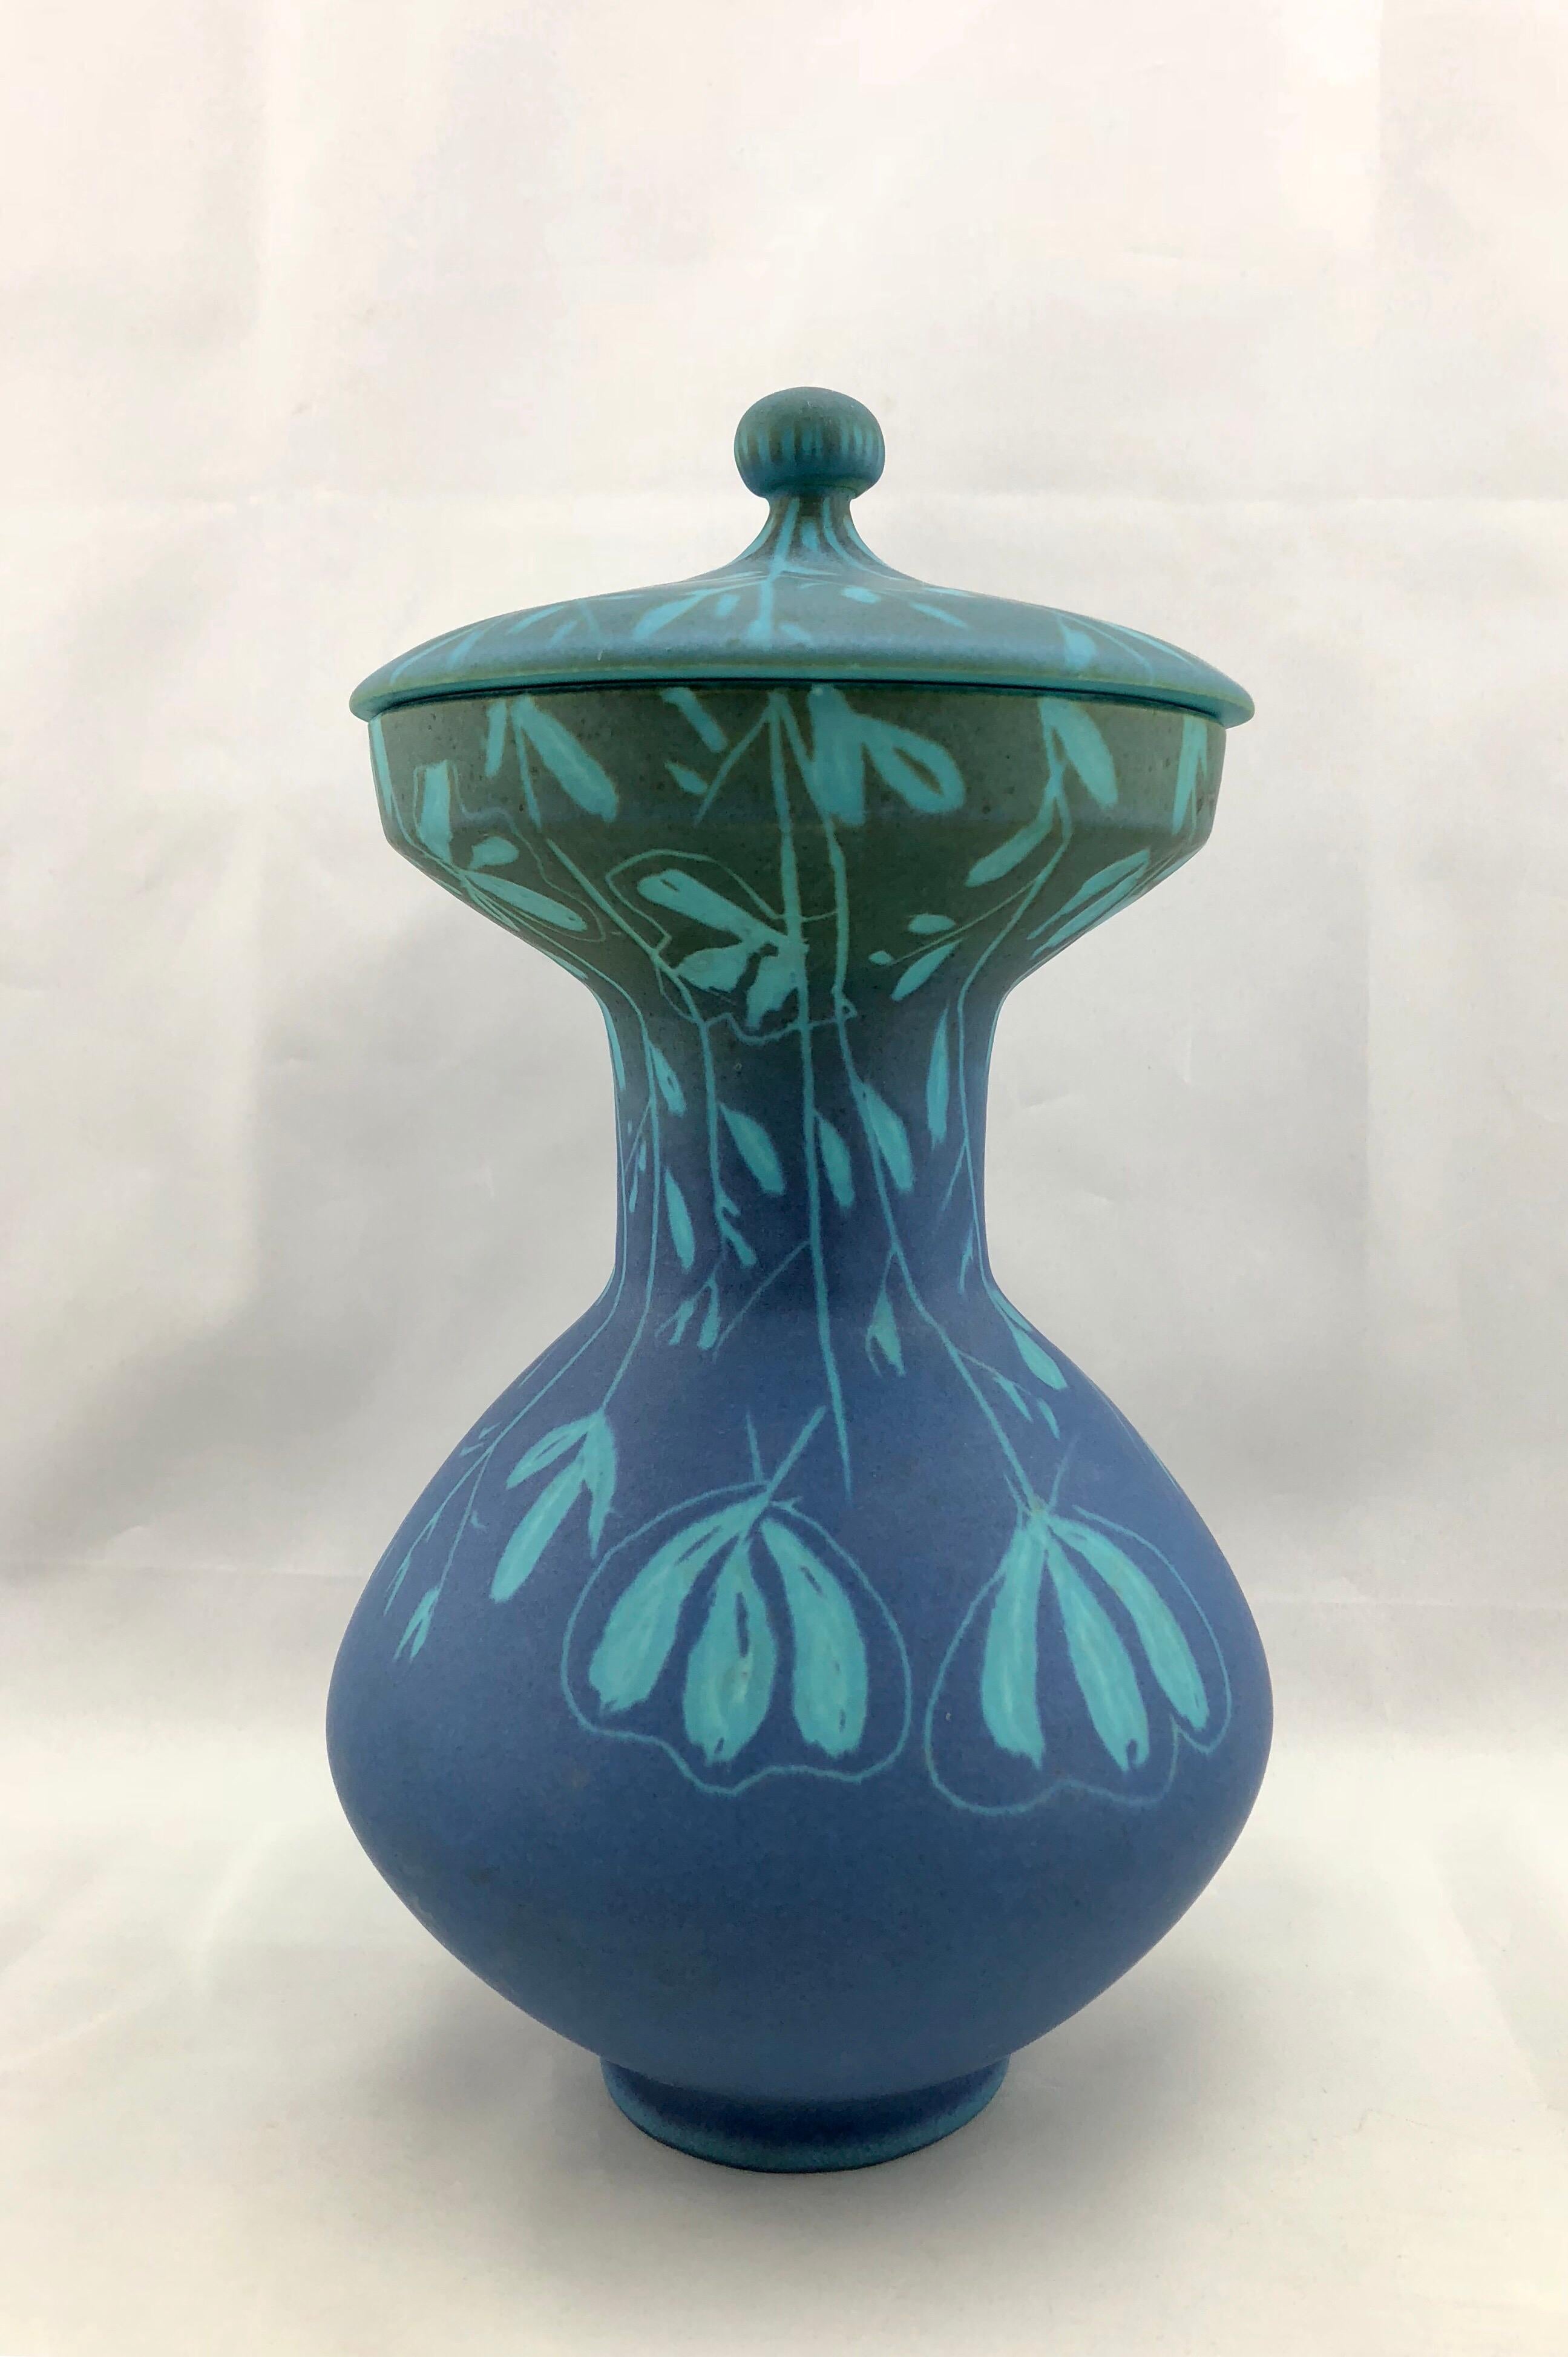 Uncommon blue Italian vase by Alvino Bagni for Raymor, Mid-Century Modern. Vase features a floral design in vibrant blues. No known issues that would detract from value or aesthetics. Ready for use.